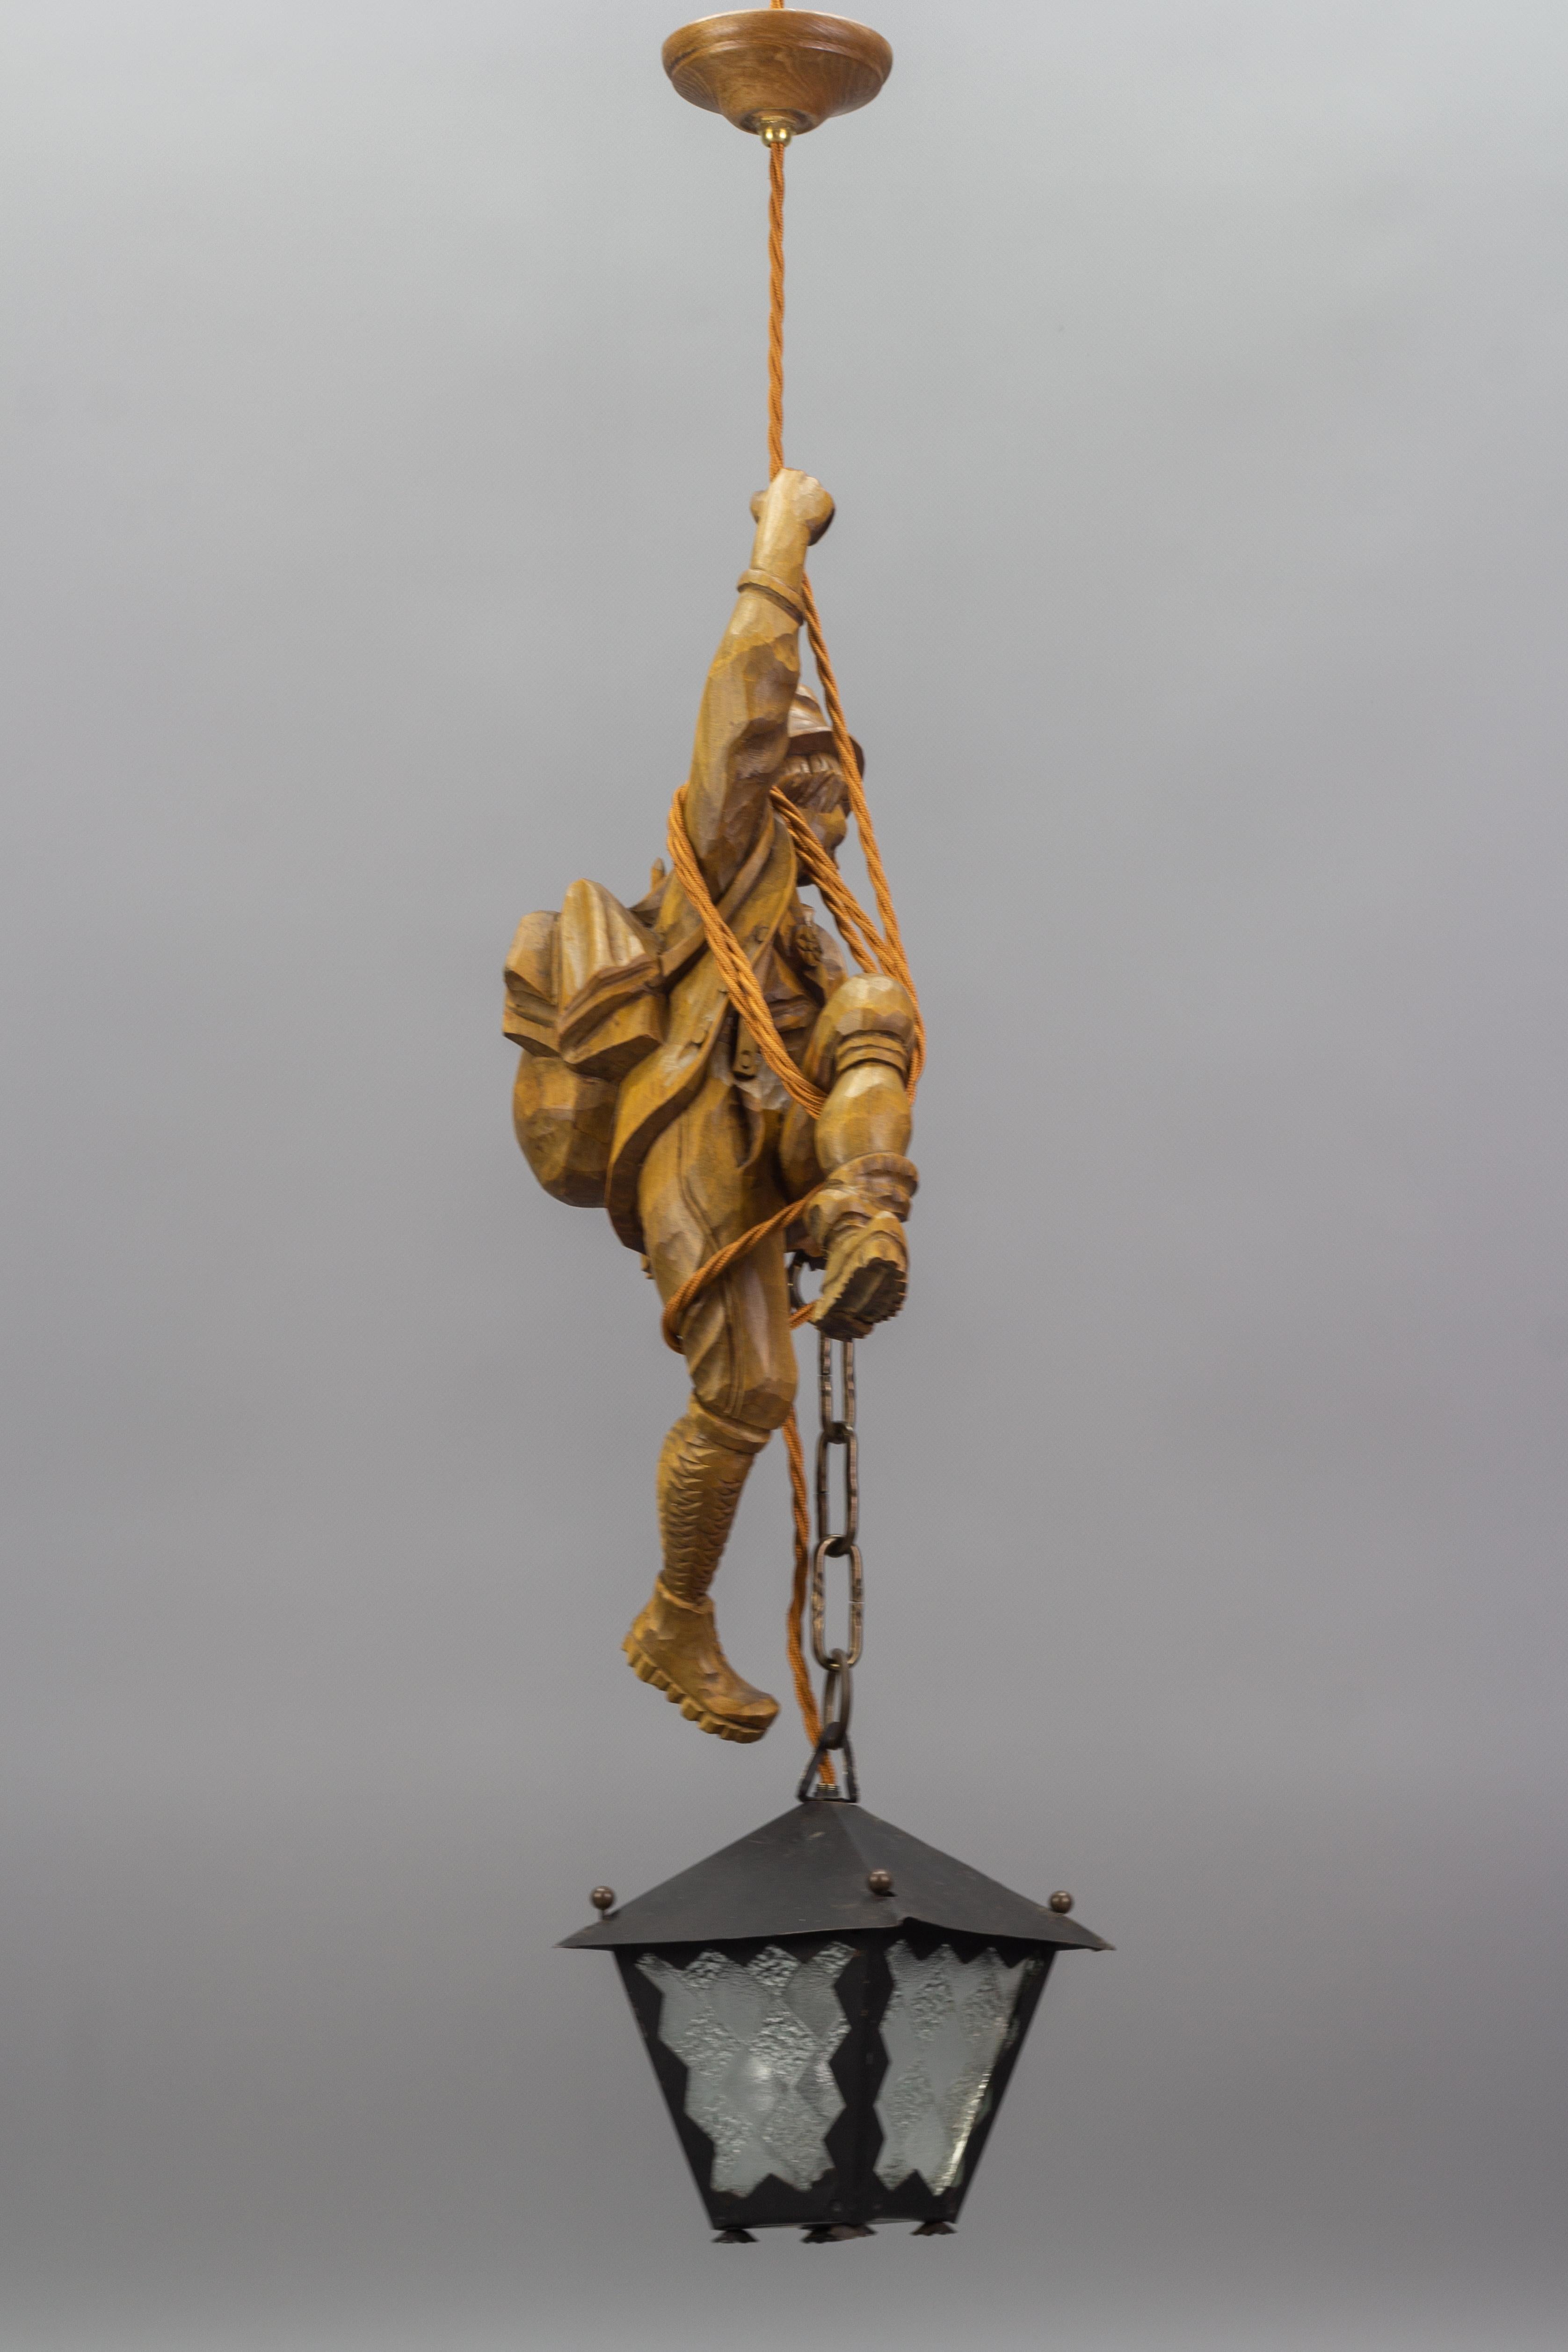 Mid-20th Century Pendant Light Fixture Carved Wood Figure Climber with Lantern, Germany